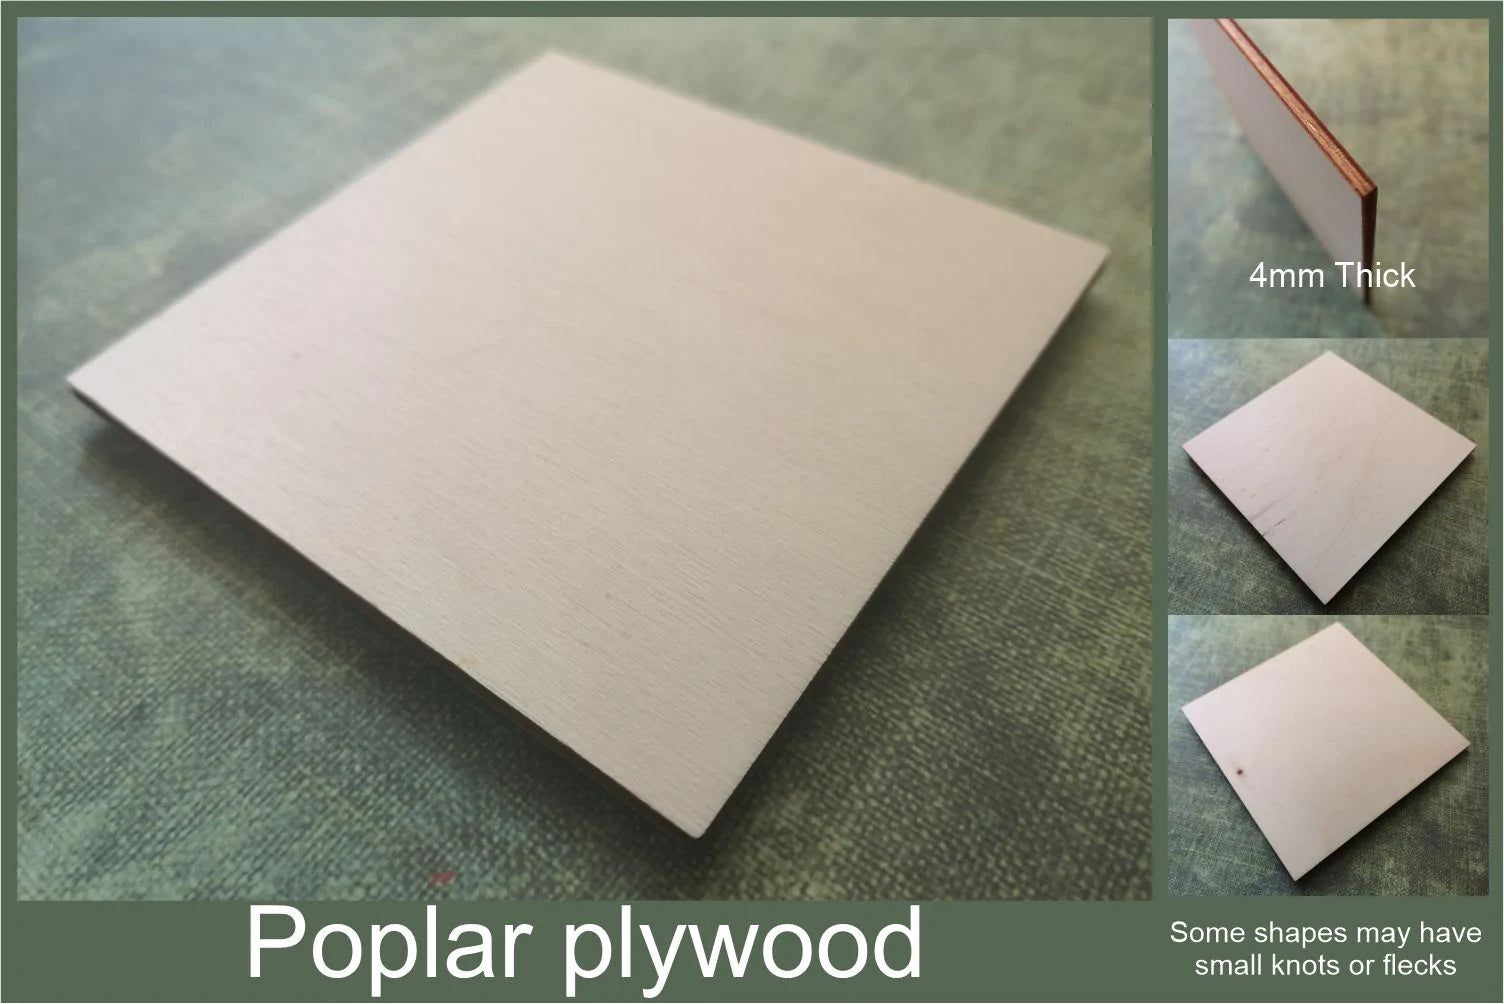 4mm thick poplar plywood used to make the Shopping bag cut-outs ready for crafting